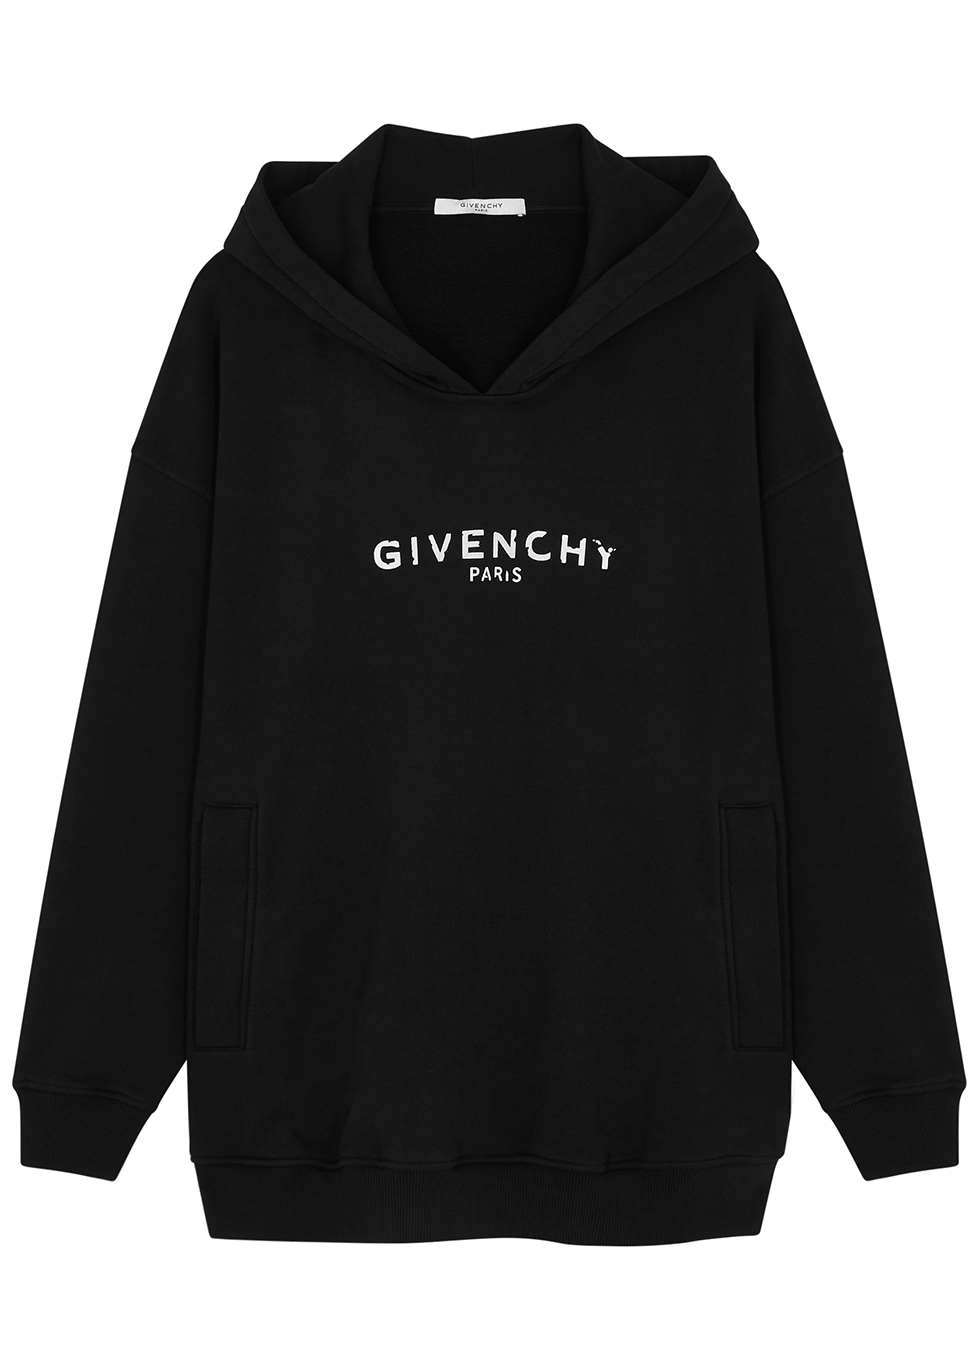 Givenchy Sweatshirt Logo Flash Sales, UP TO 61% OFF | www 